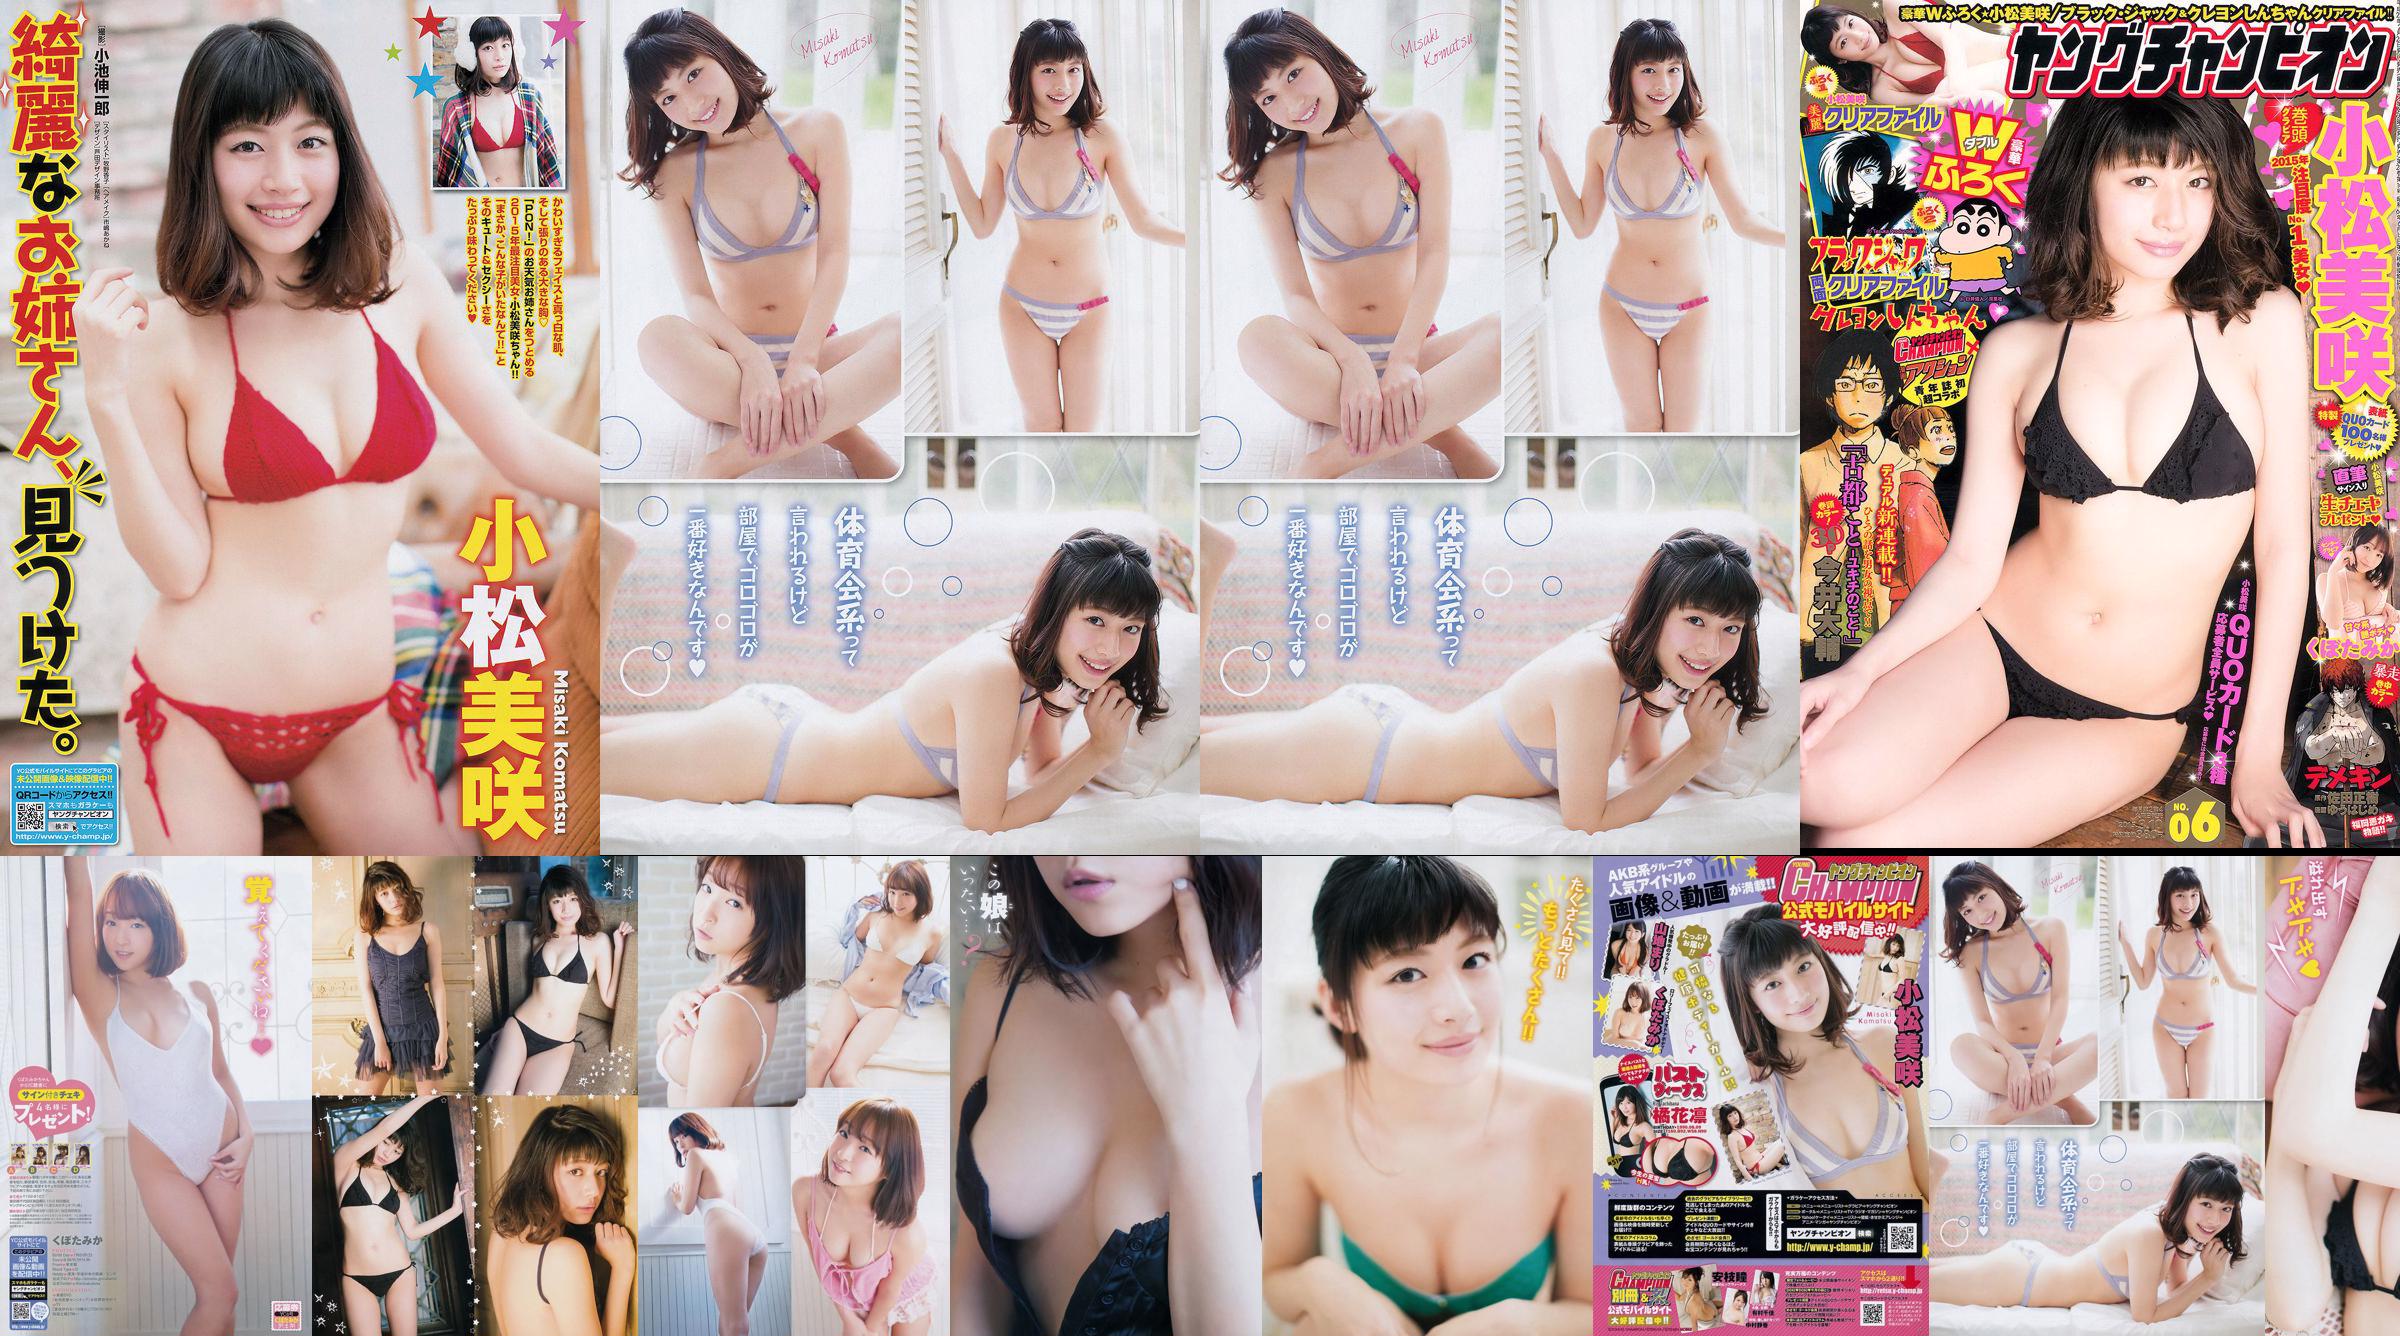 Hina Aizuki "Chaque! Belle! Fille !!" [Sabra.net] Strictly Girl No.d34144 Page 5